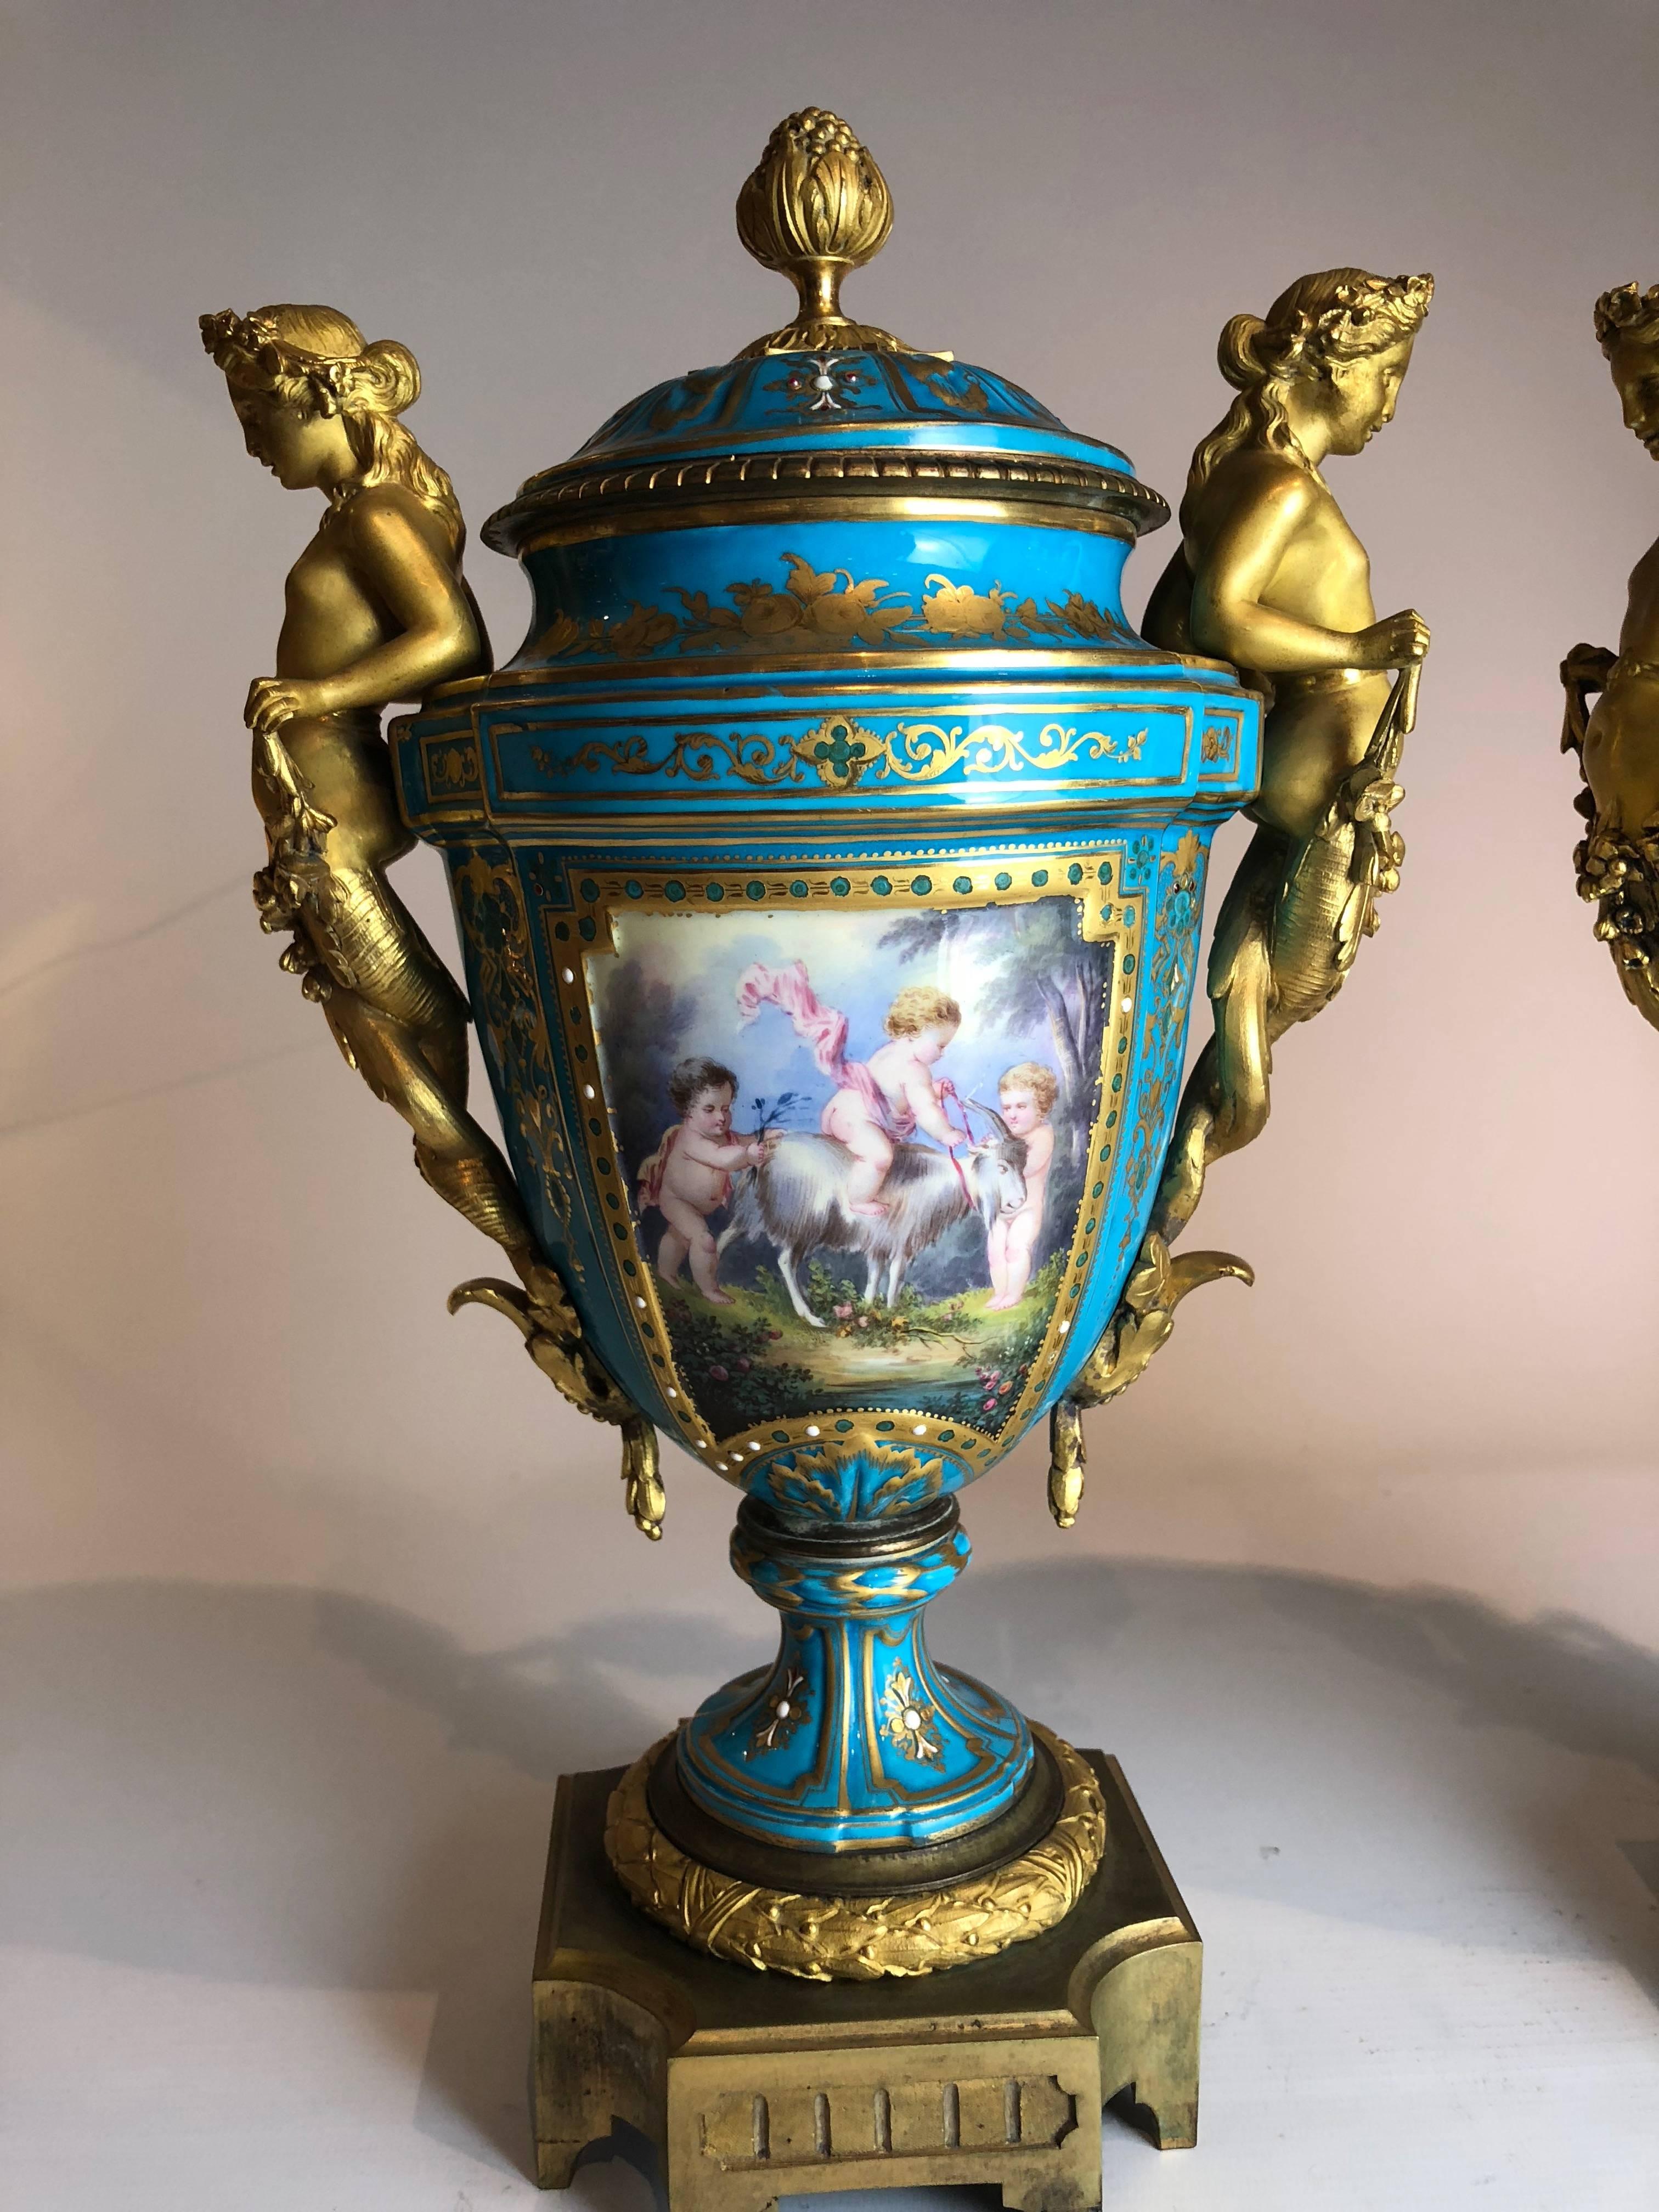 A fantastic pair of gilt bronze-mounted Sèvres vase, of the highest quality.

French, circa 1870

They stand 19